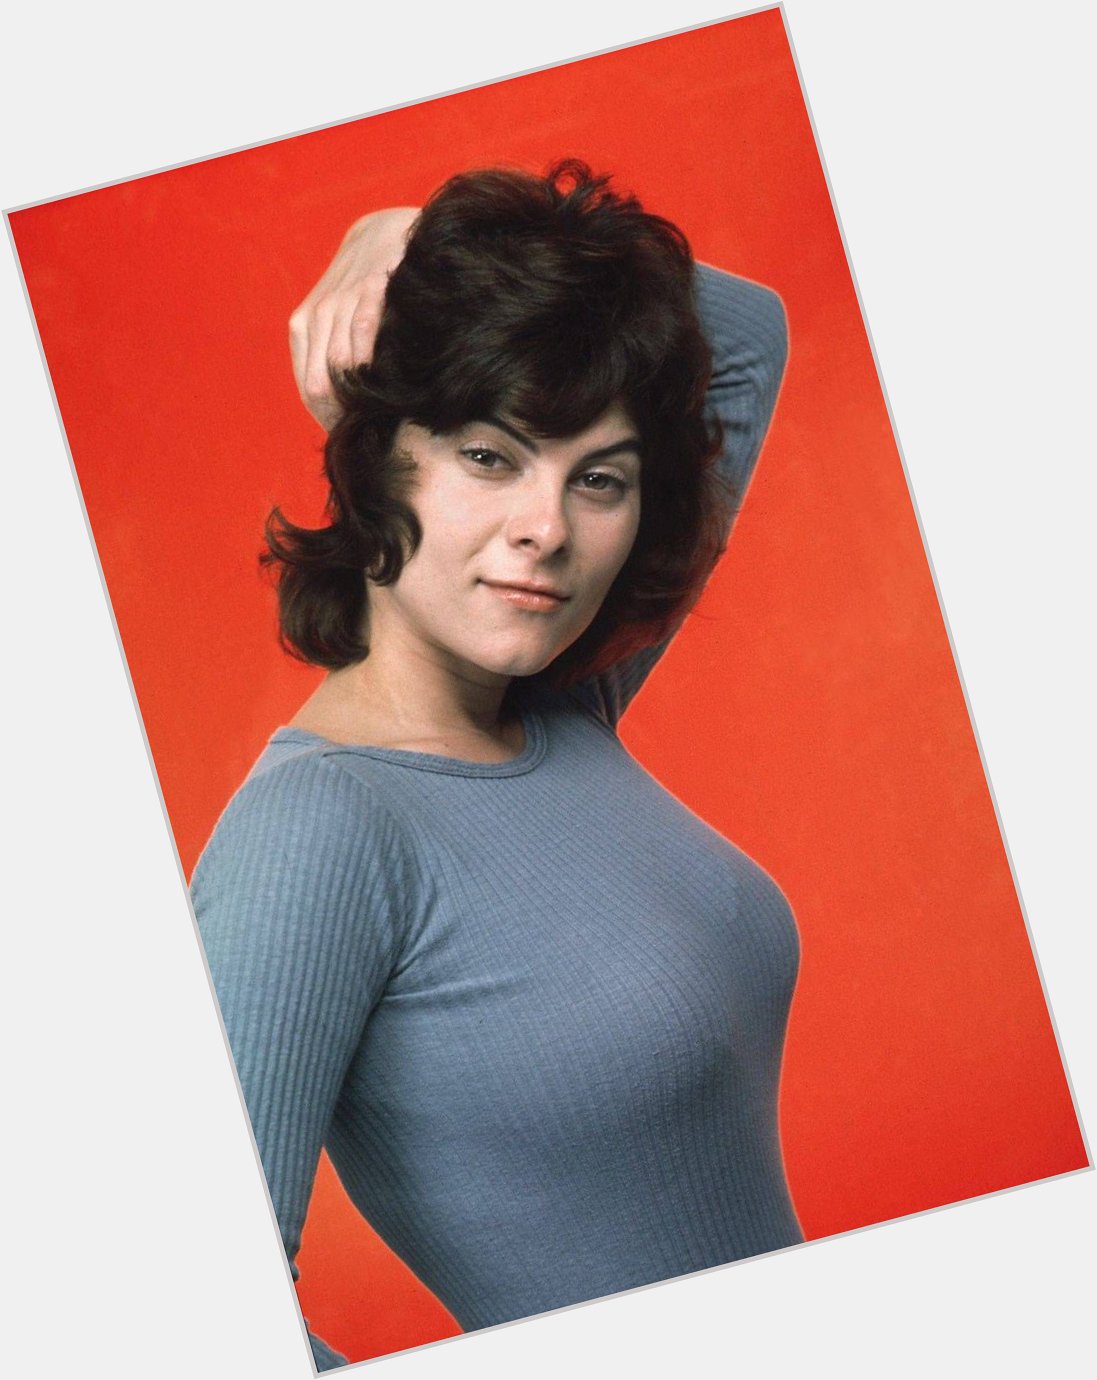 Good morning. Starting today with a Happy Birthday. ADRIENNE BARBEAU 